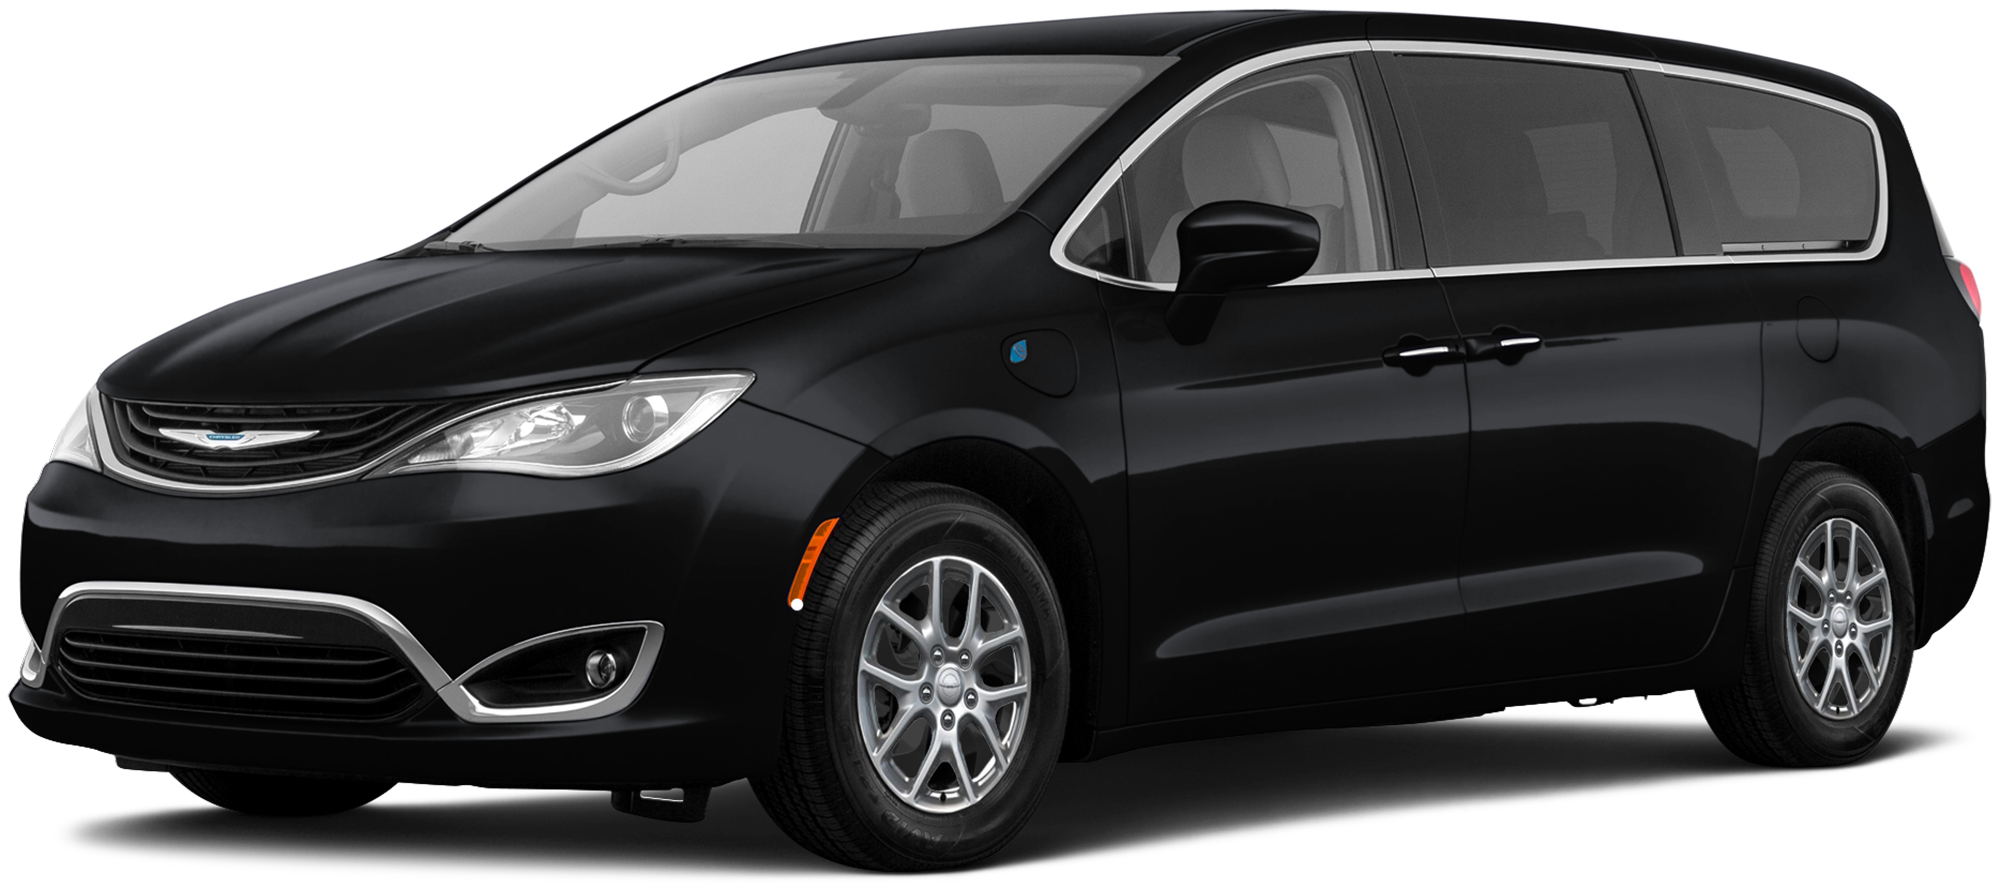 2020 Chrysler Pacifica Hybrid Incentives Specials Offers In Greenvale NY